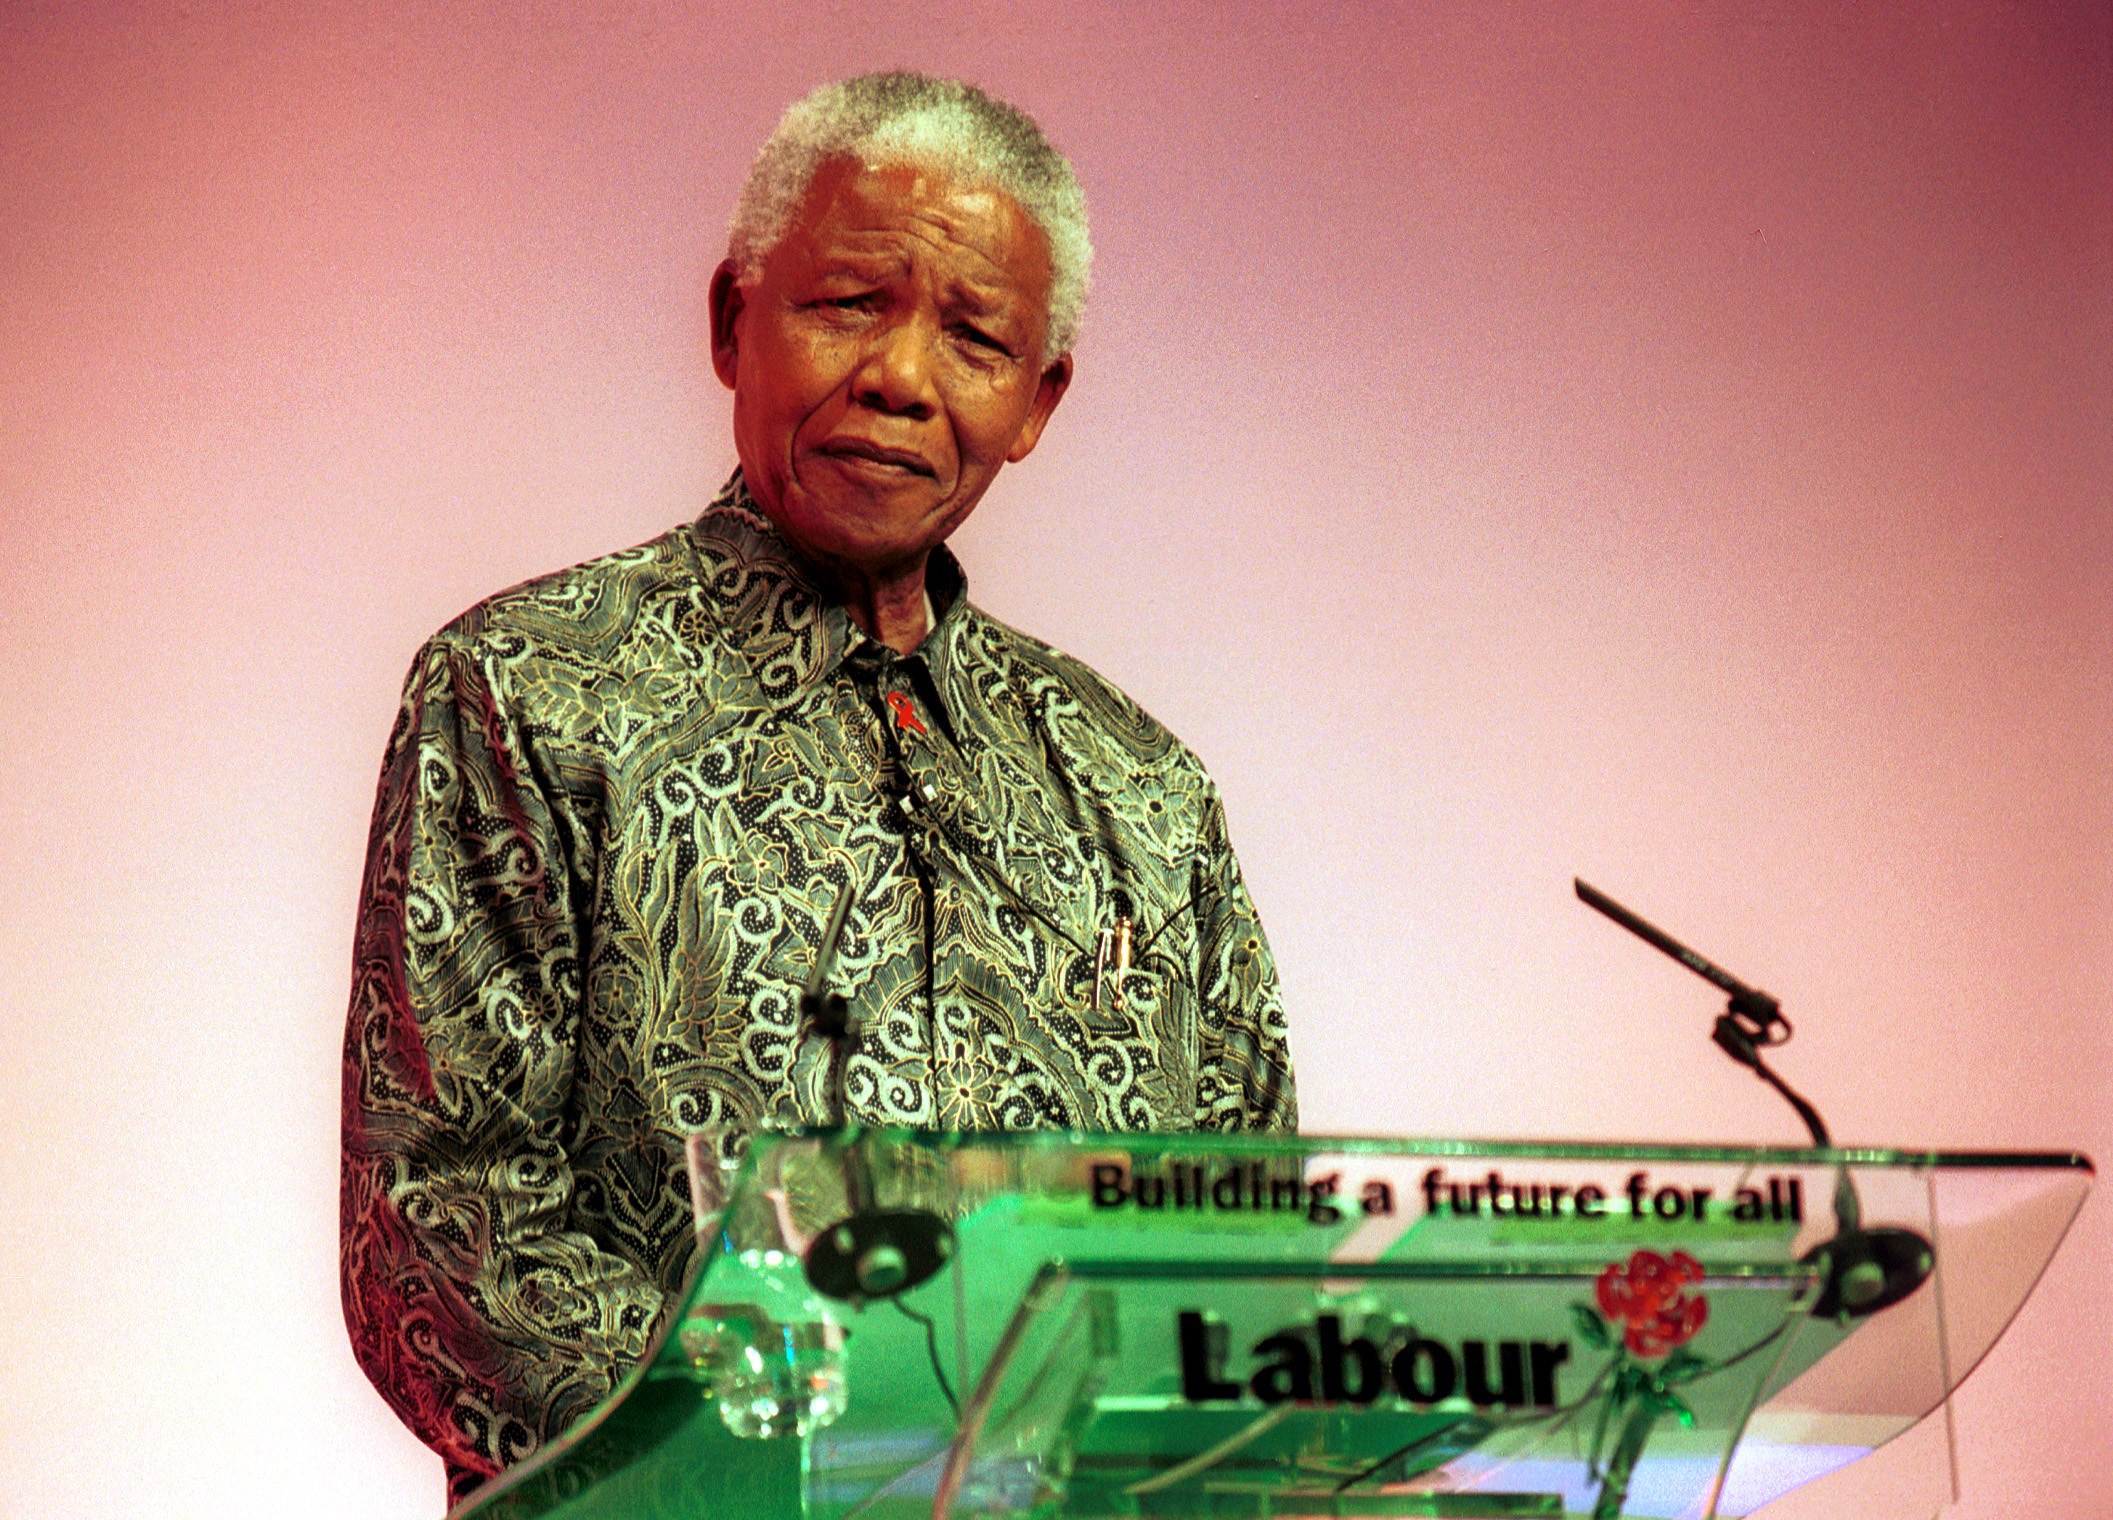 Nelson Mandela giving a speech at the end of the annual Labour conference in Brighton, on 17/09/2000